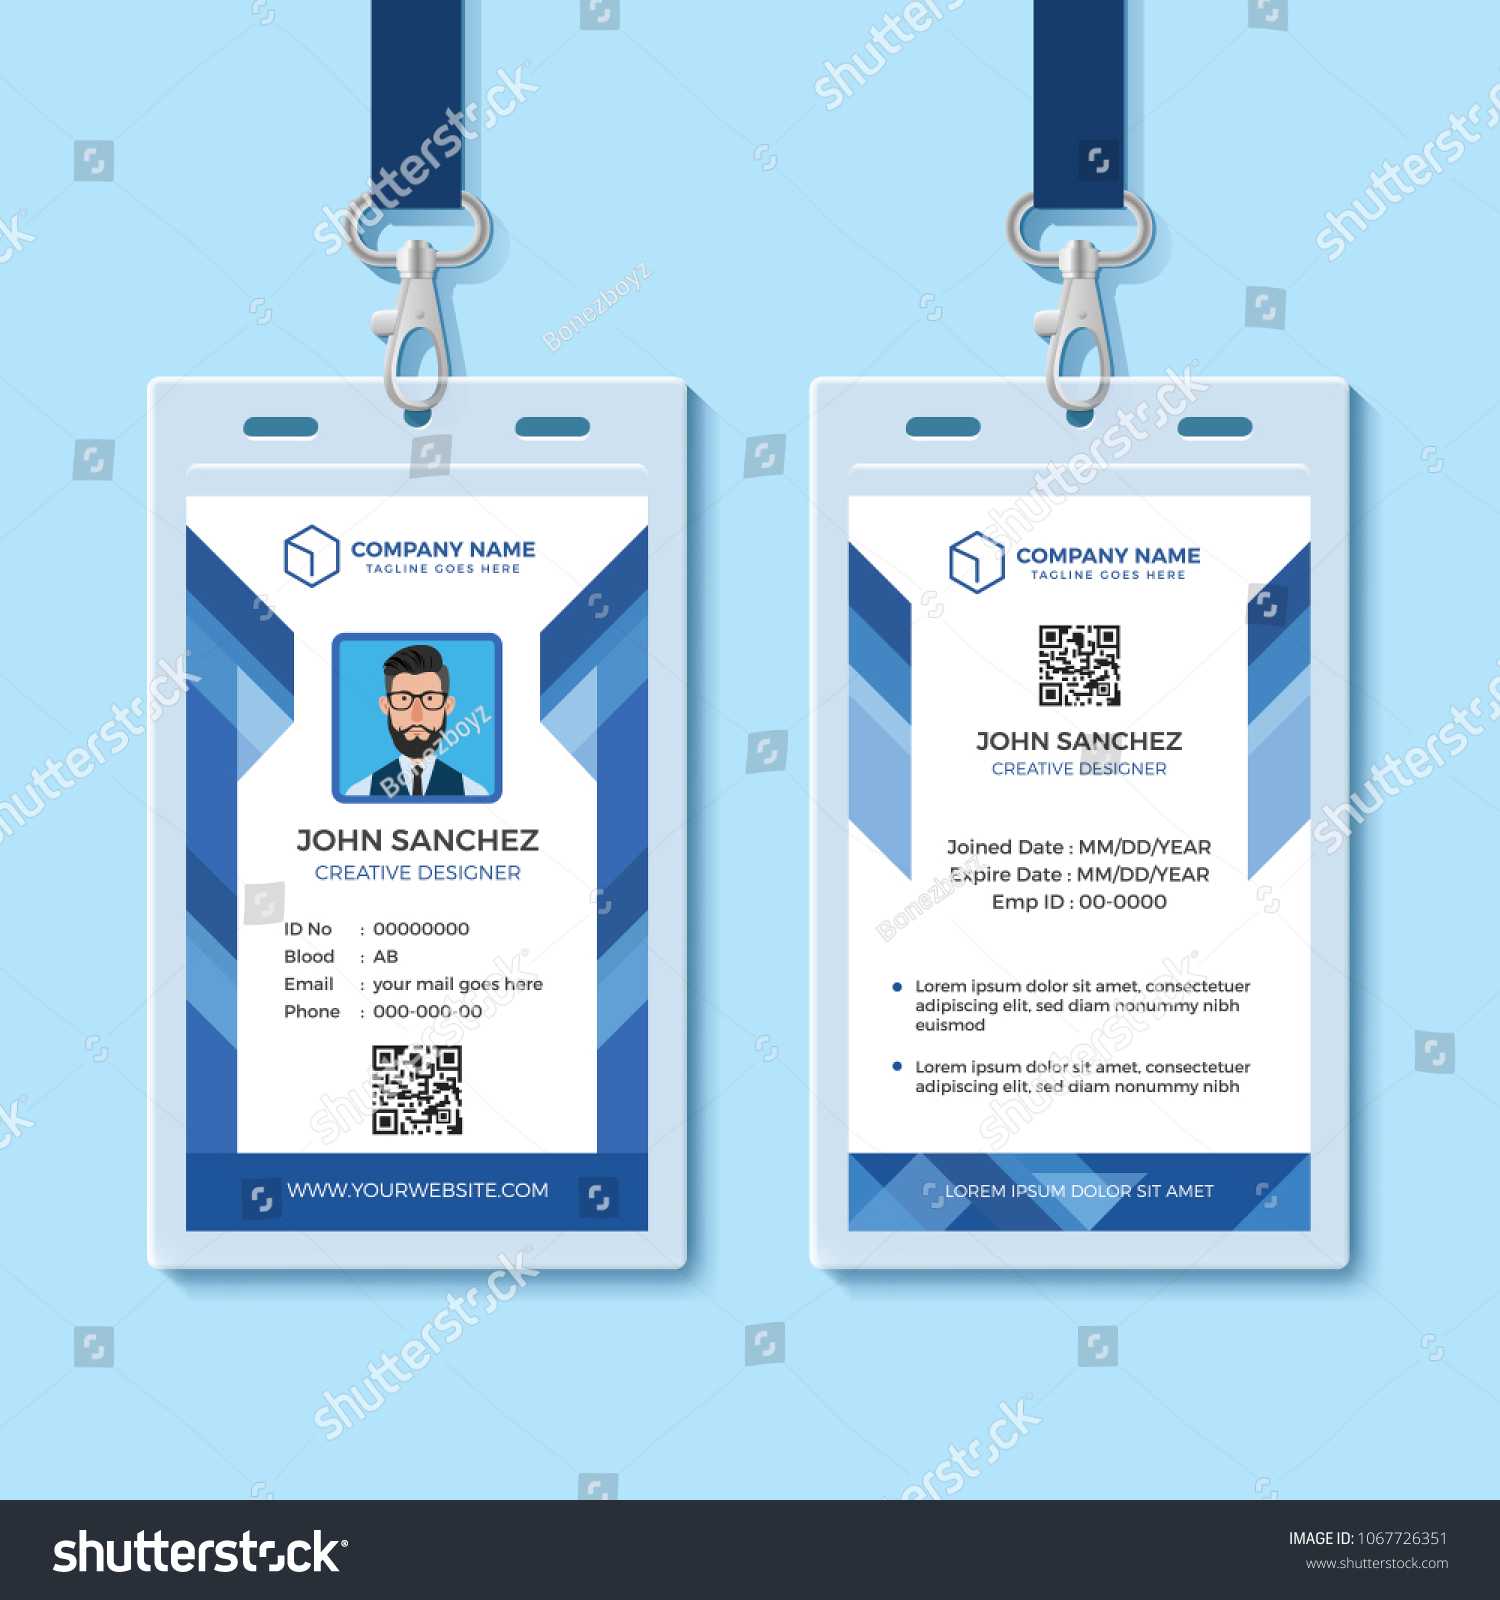 Blue Employee Id Card Template Stock Image | Download Now With Work Id Card Template